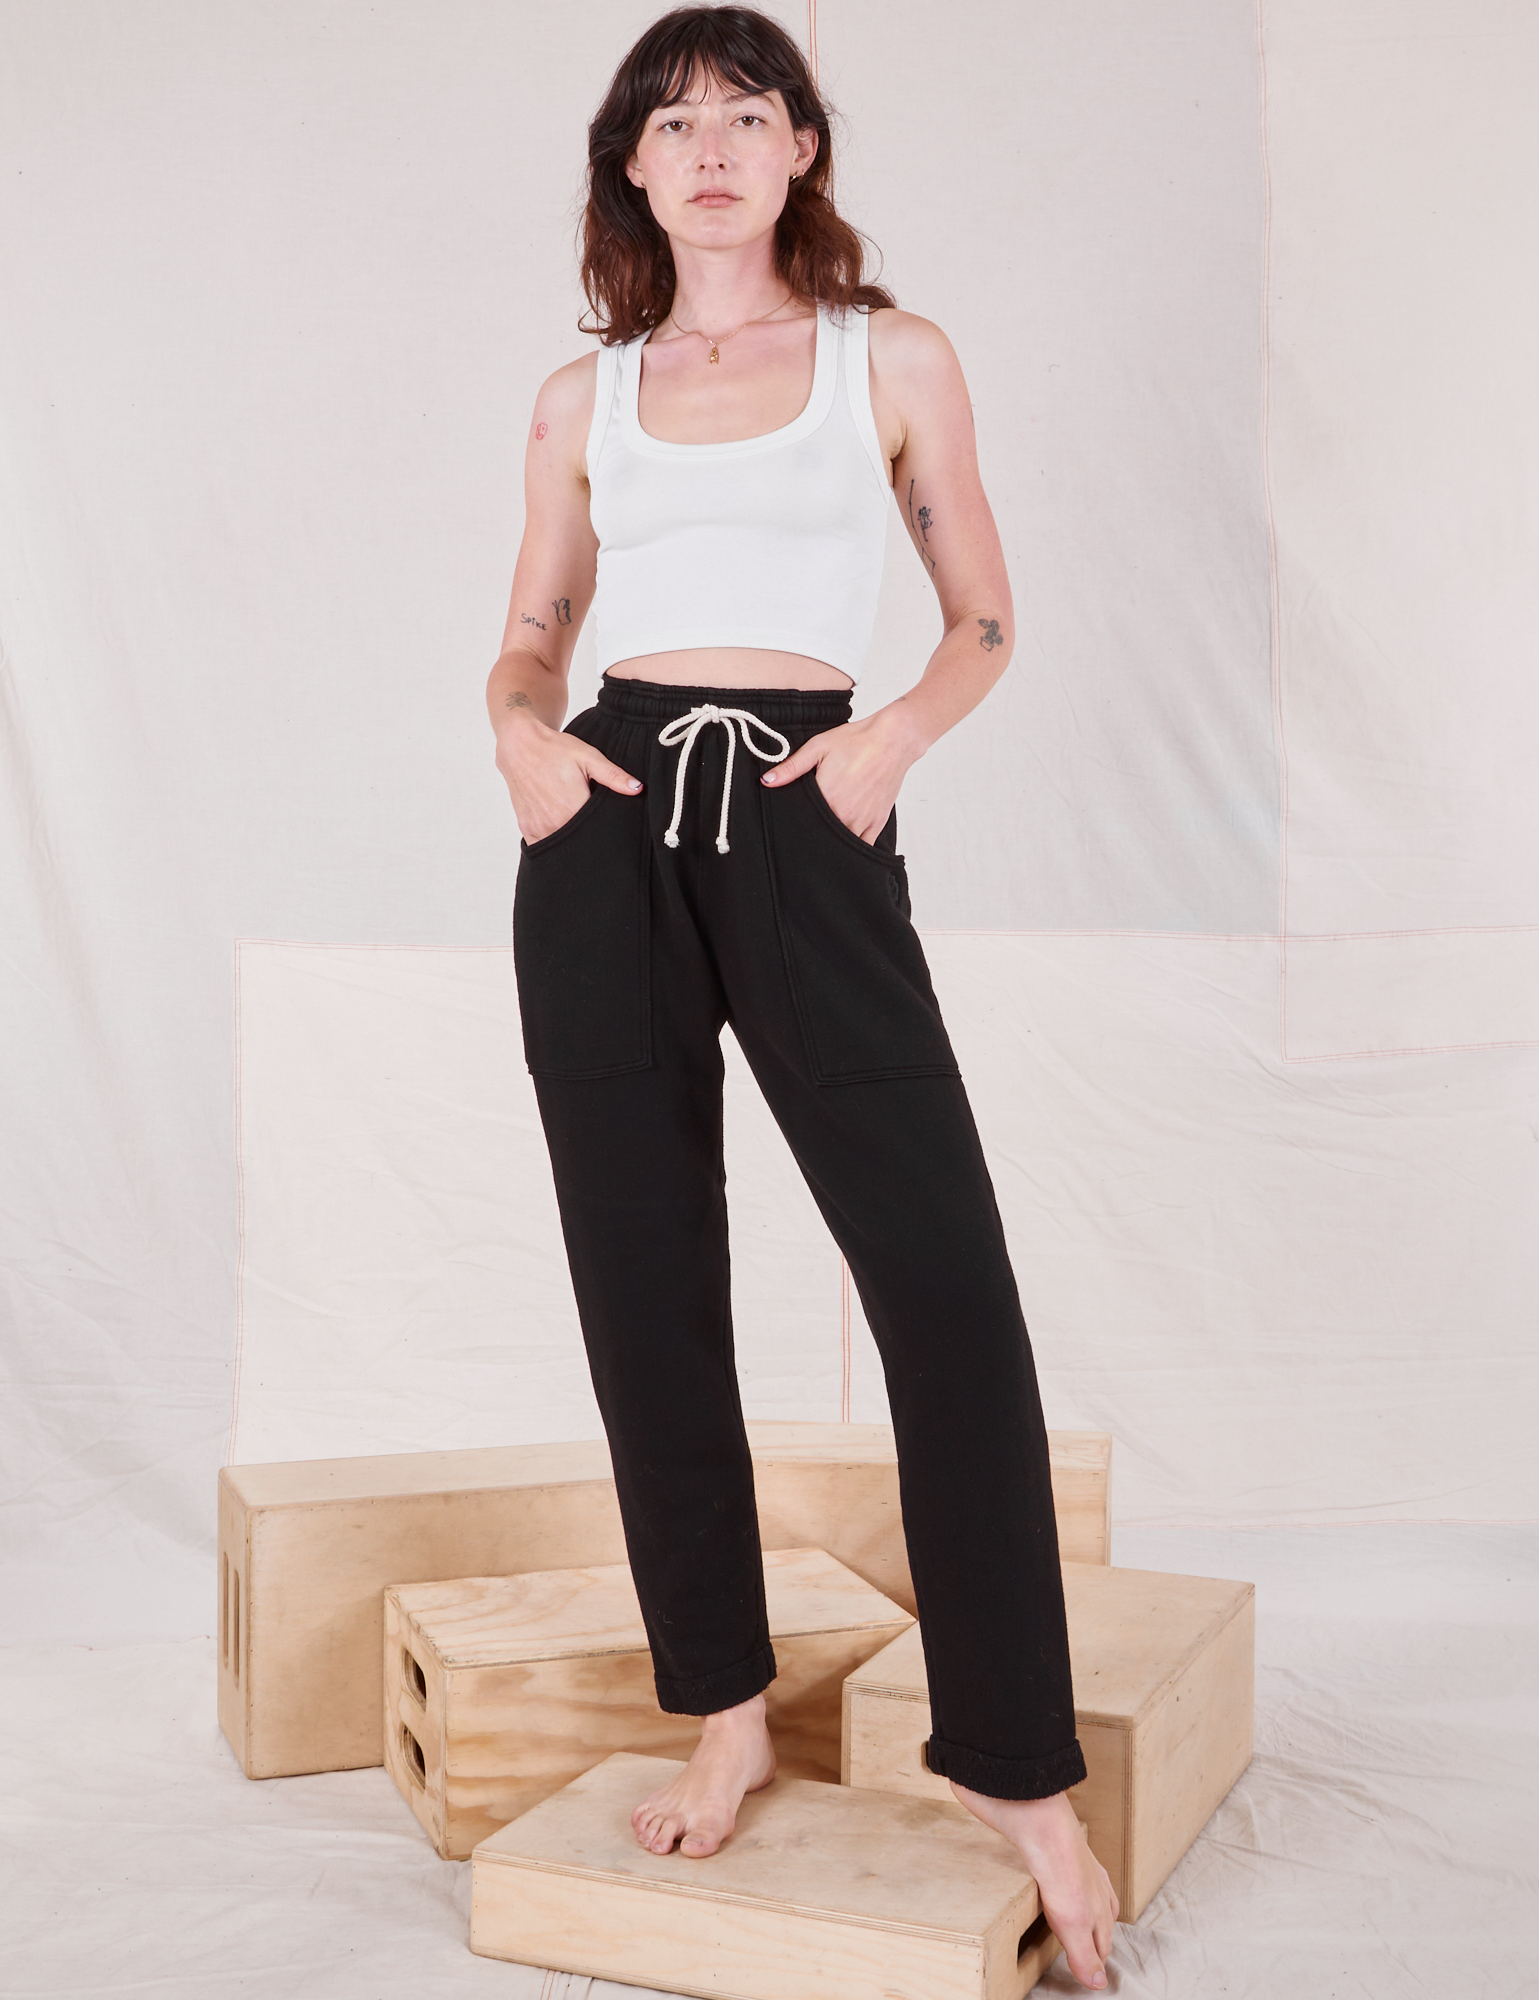 Alex is 5&#39;8&quot; and wearing P Rolled Cuff Sweat Pants in Basic Black paired with Cropped Tank in  vintage tee off-white 